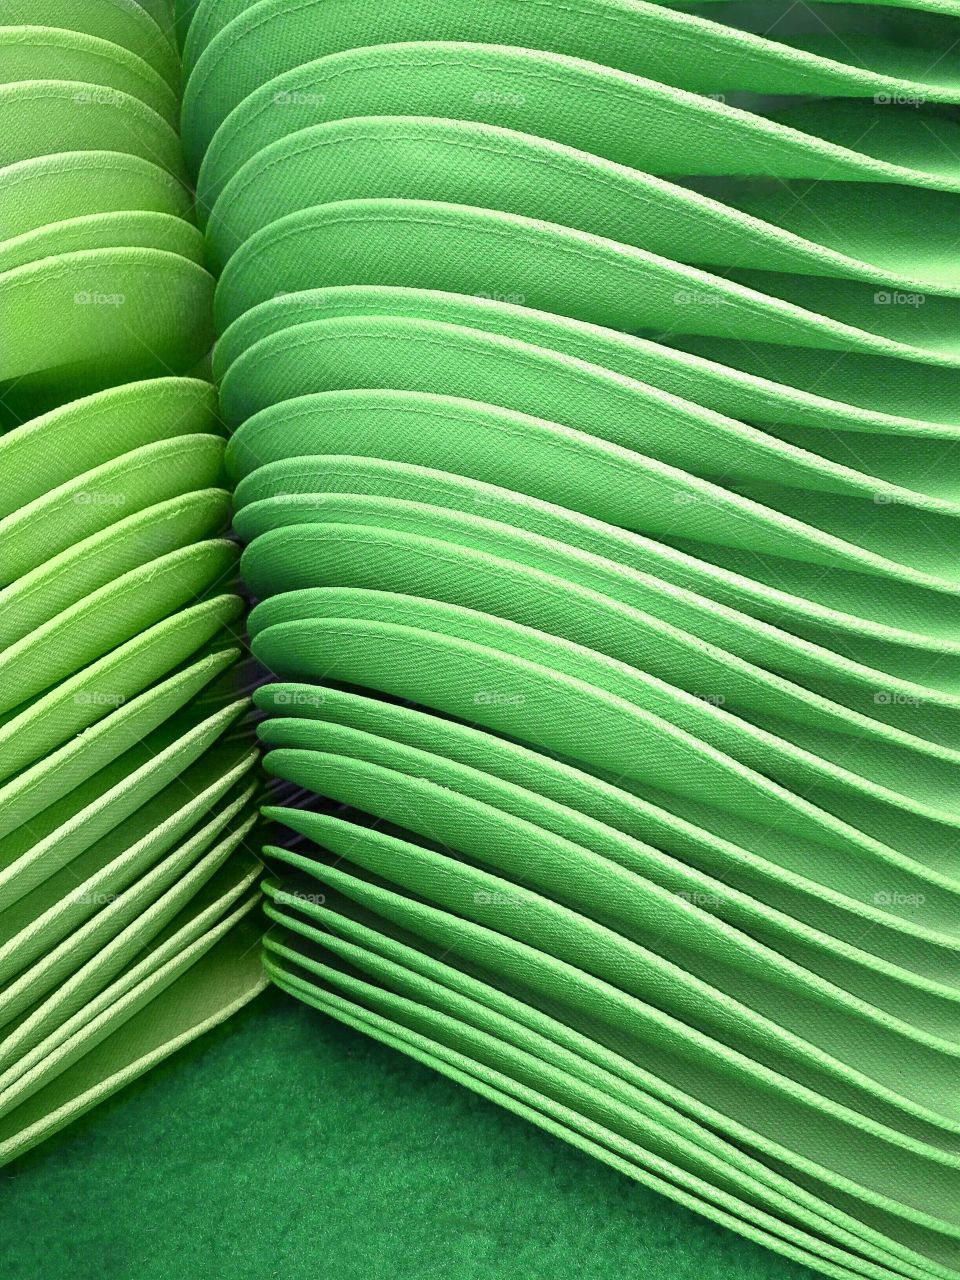 Stack of green hats.